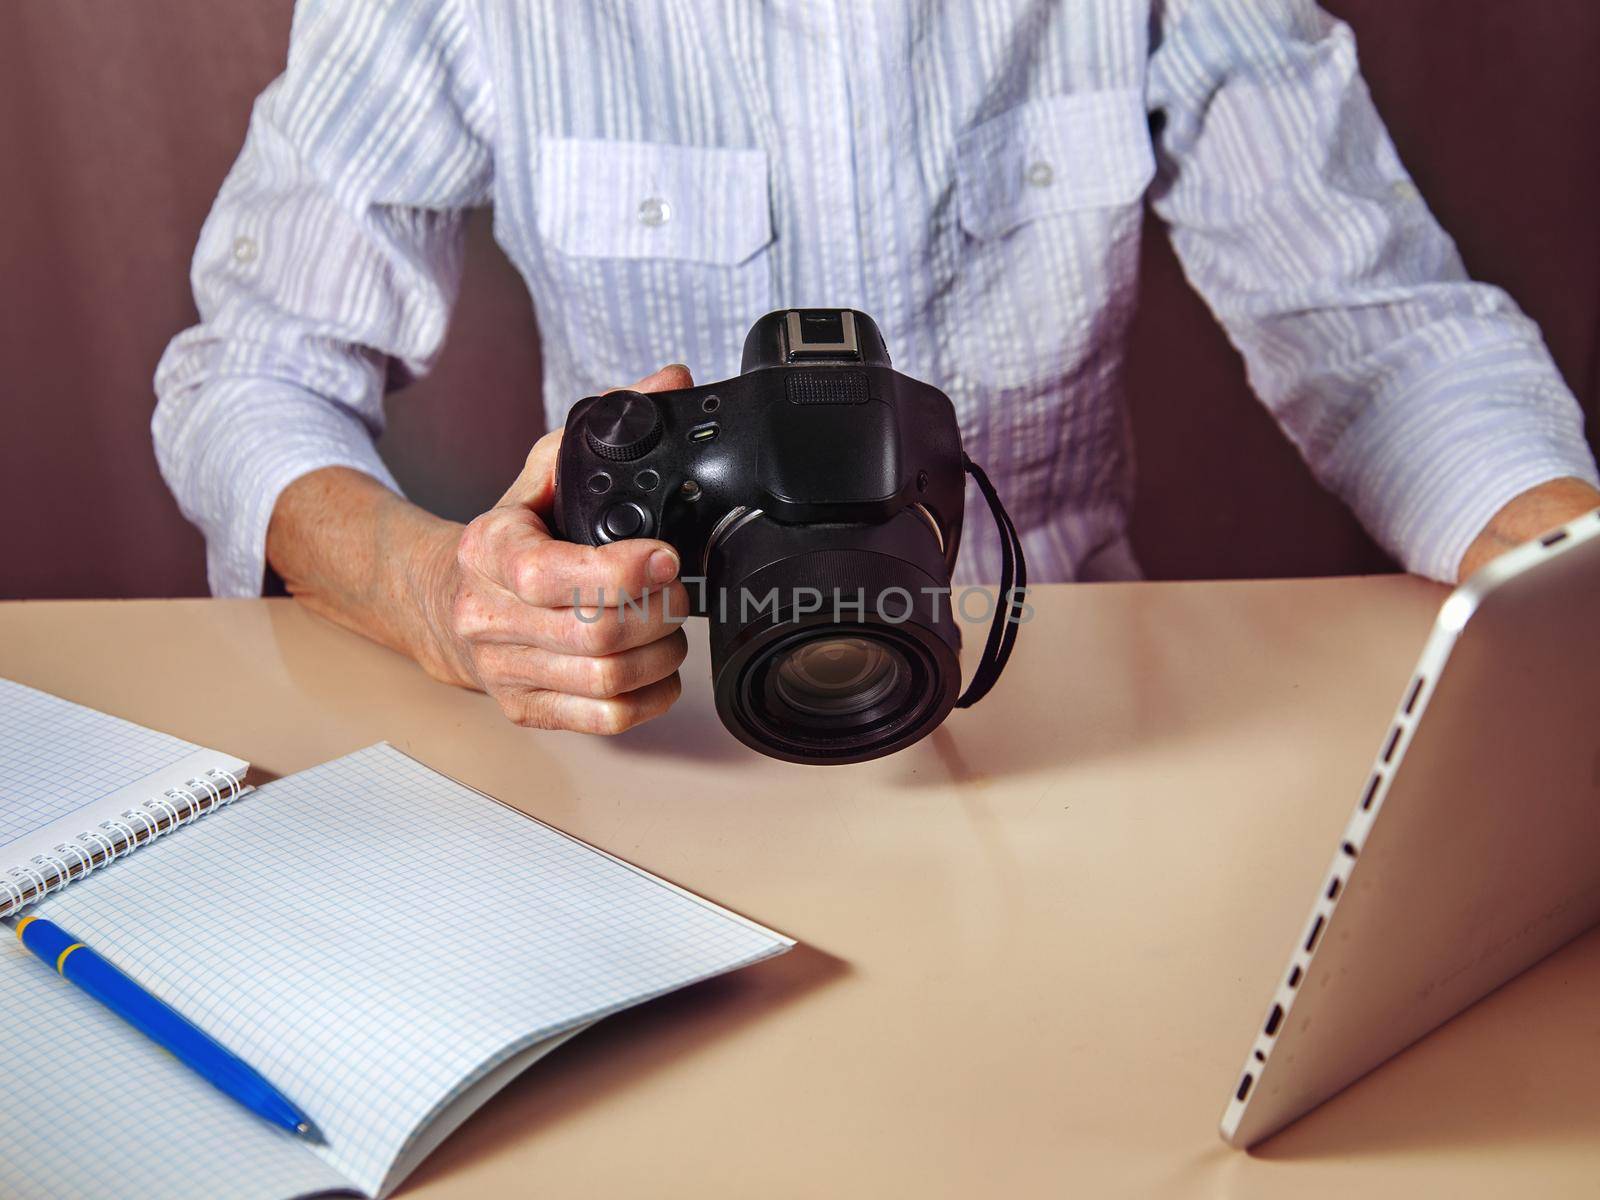 Online training. Tablet, camera, notepad, pen on white table.